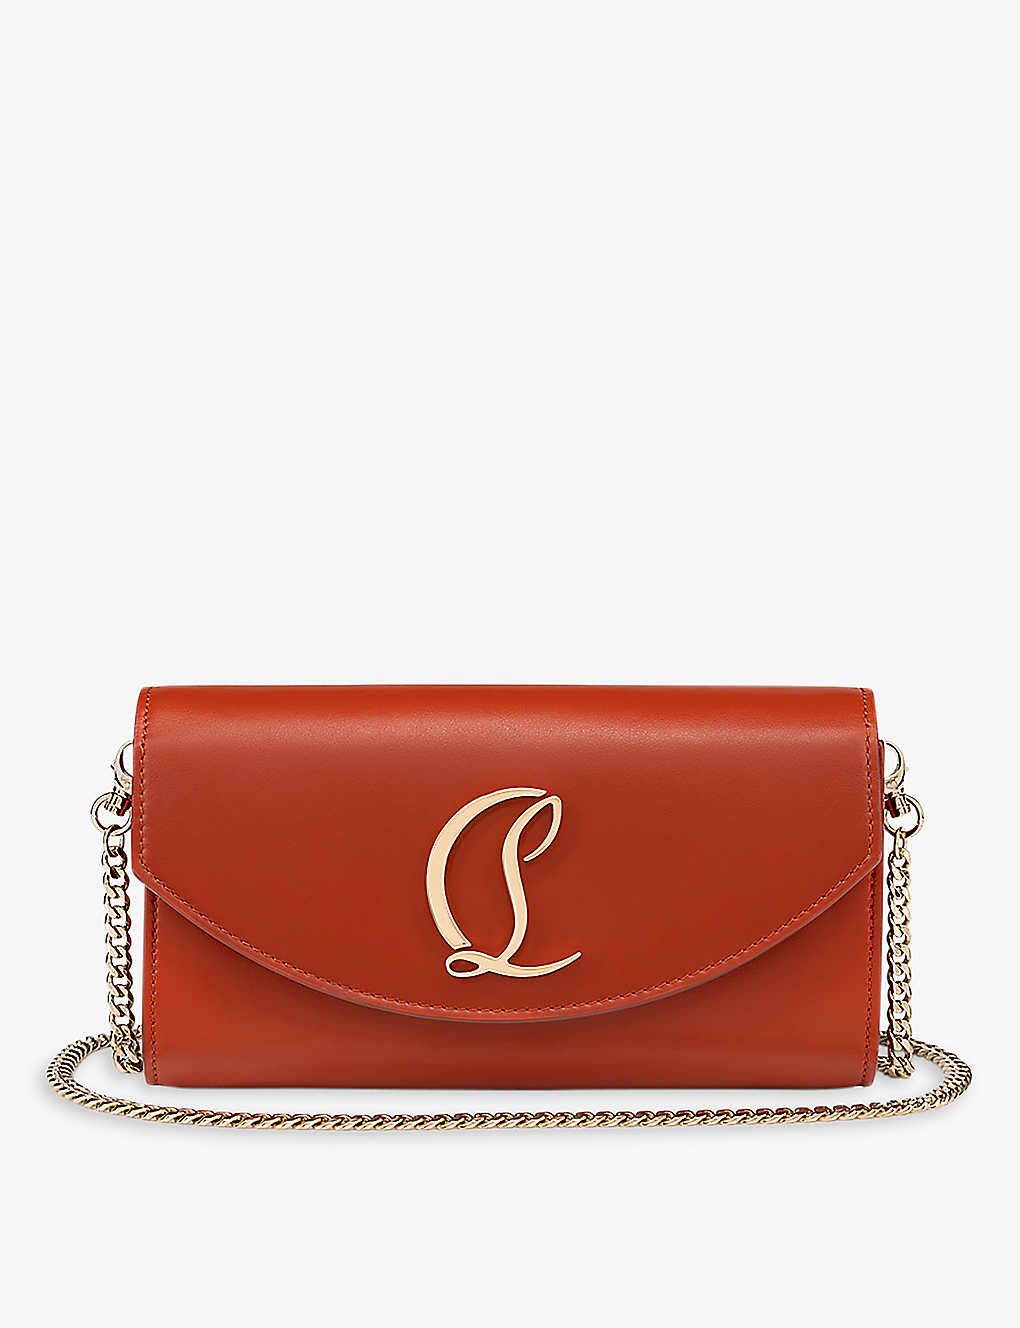 Christian Louboutin Womens Rouquine Loubi54 Leather Chain Wallet